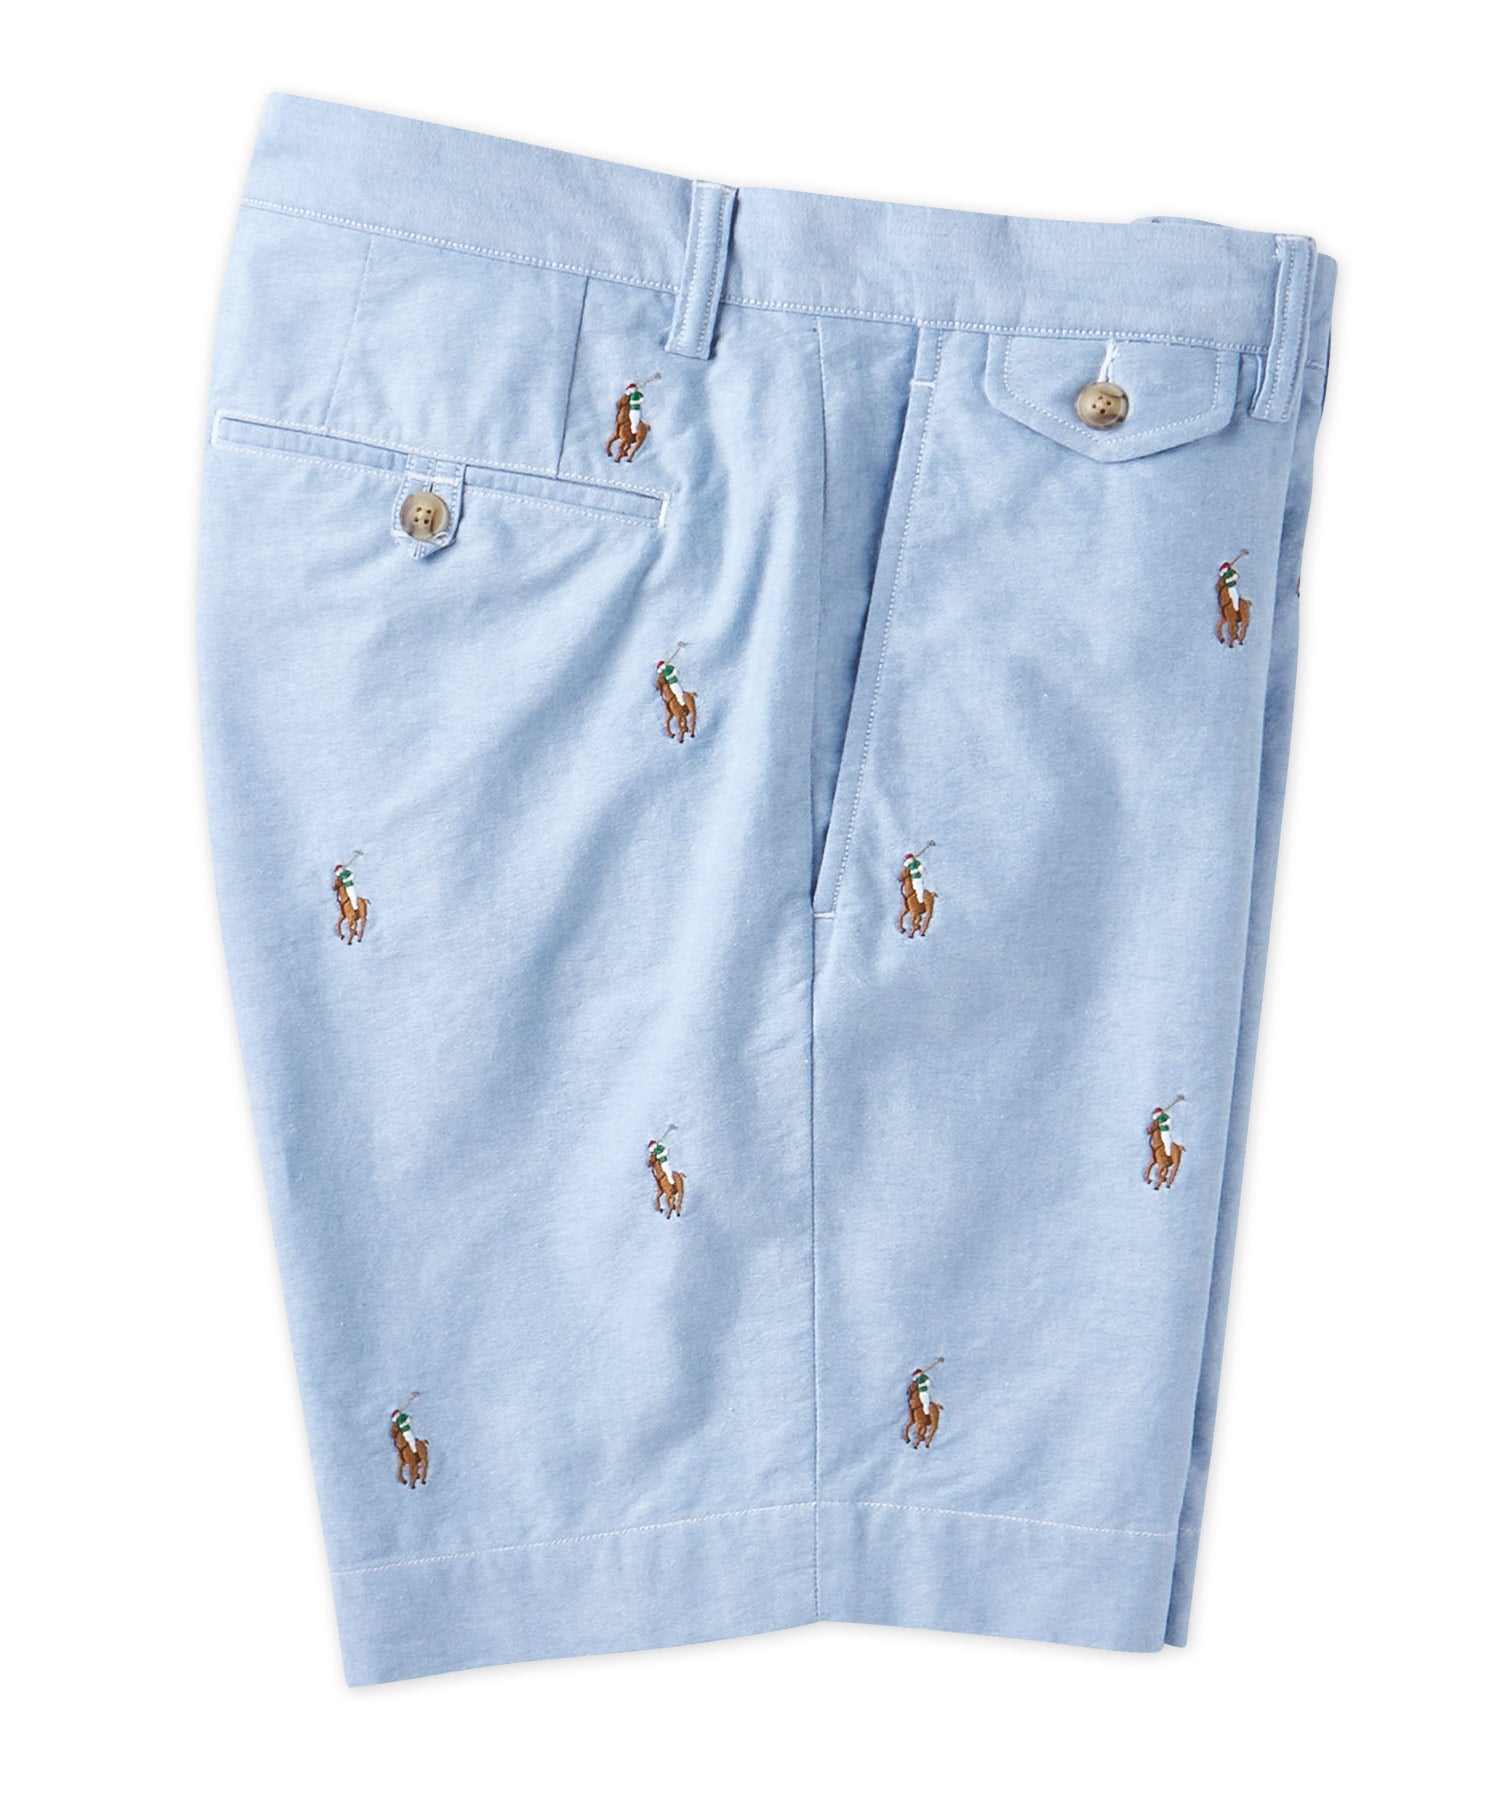 Polo Ralph Lauren Embroidered Chino Short